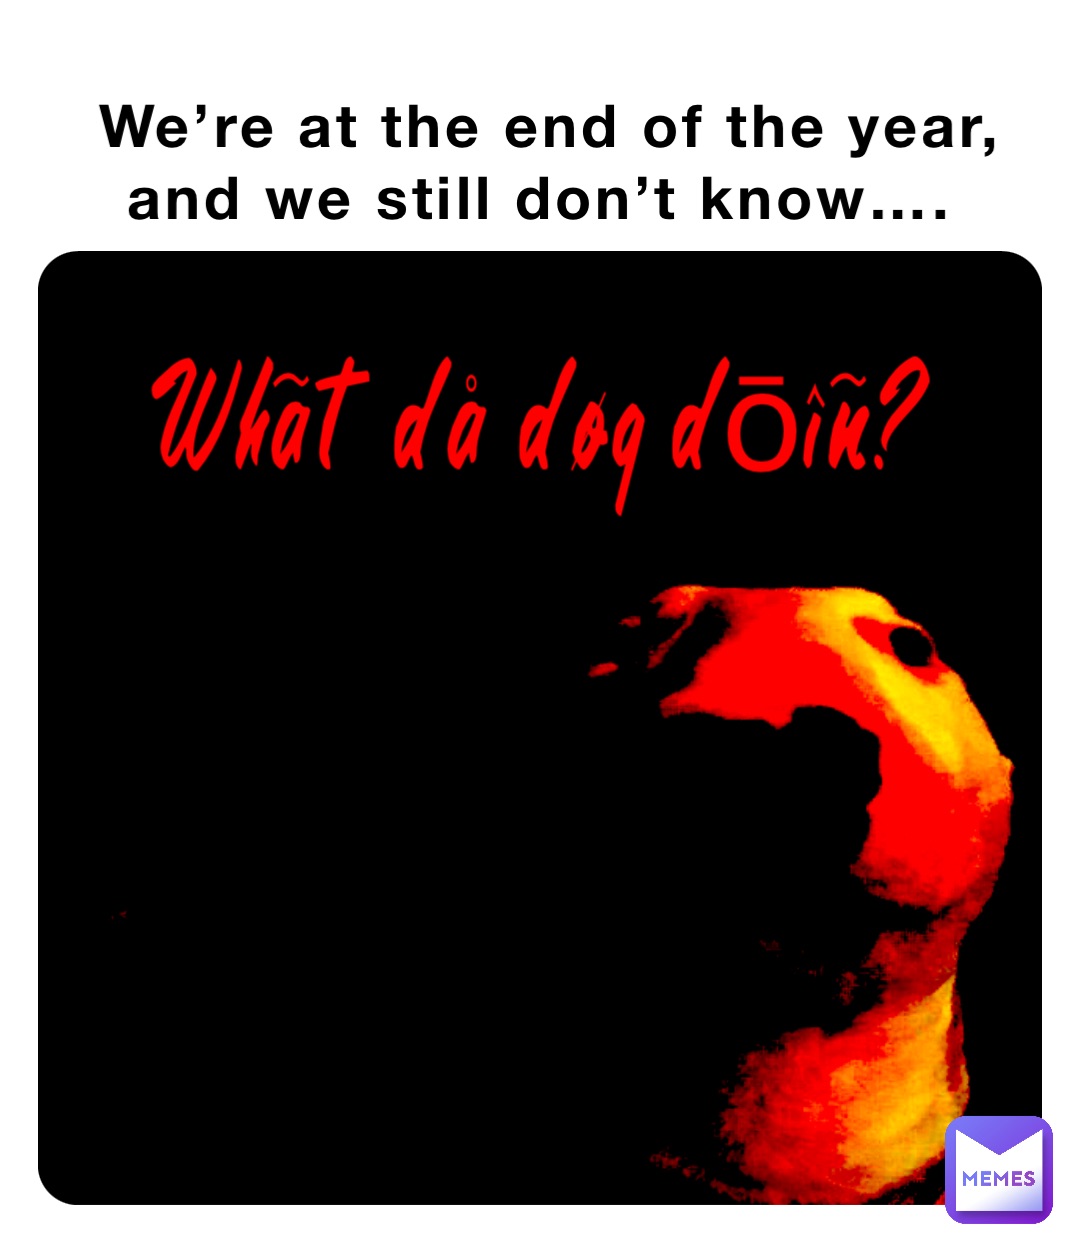 We’re at the end of the year, and we still don’t know…. Whãt då døg dōîñ?